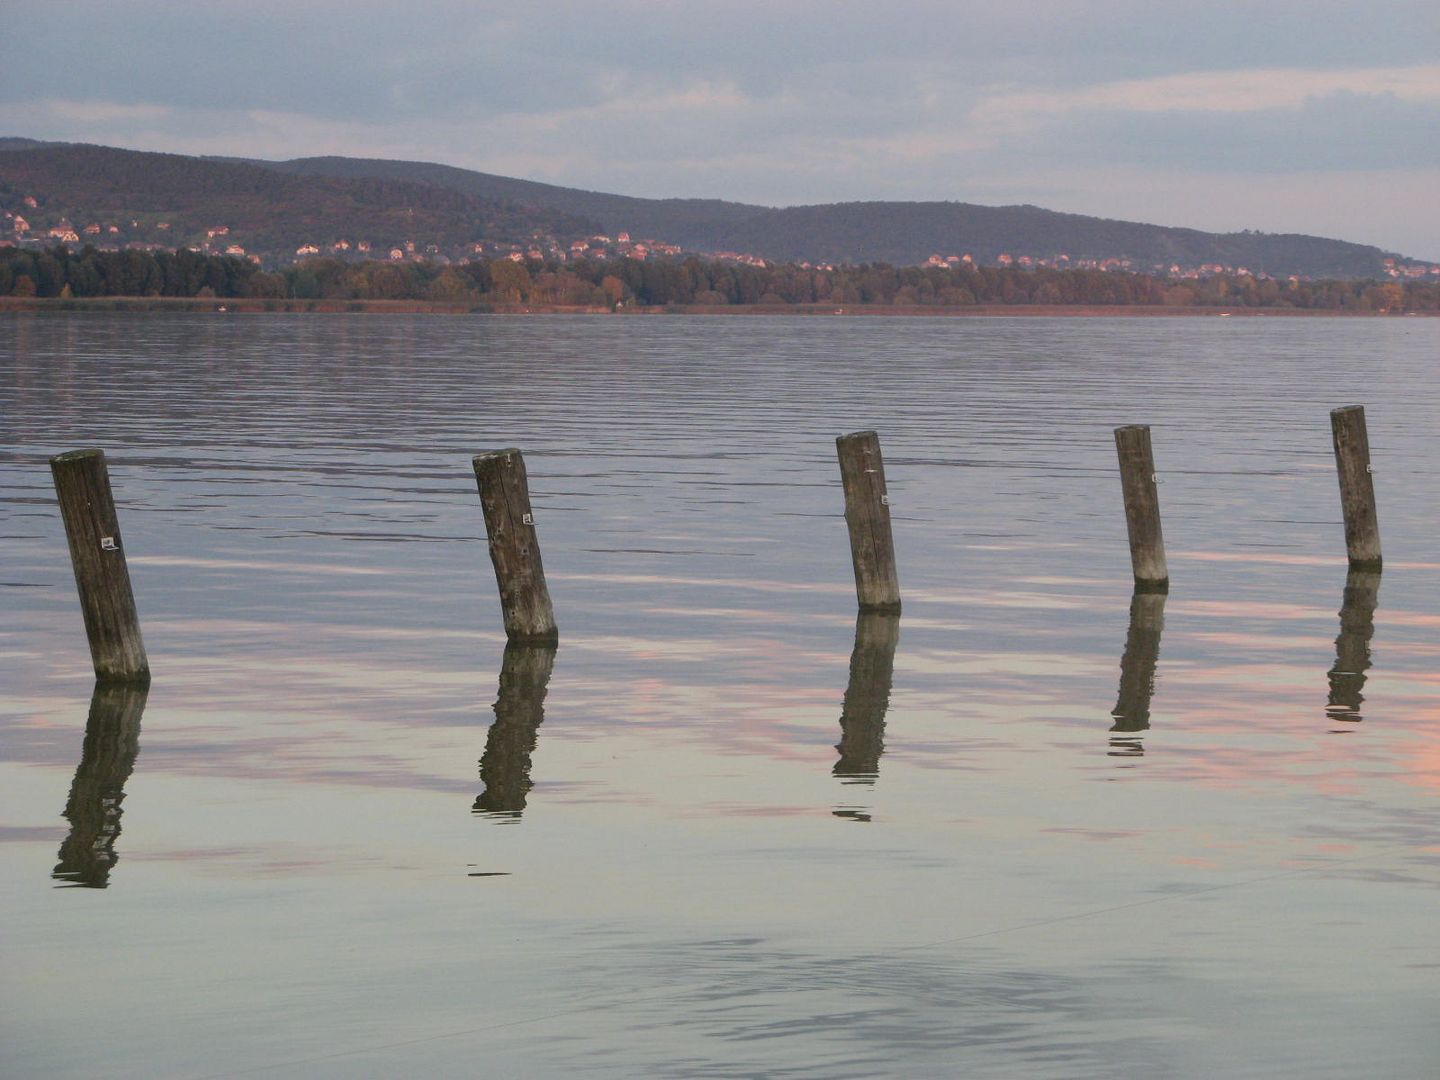 Poles in the Lake